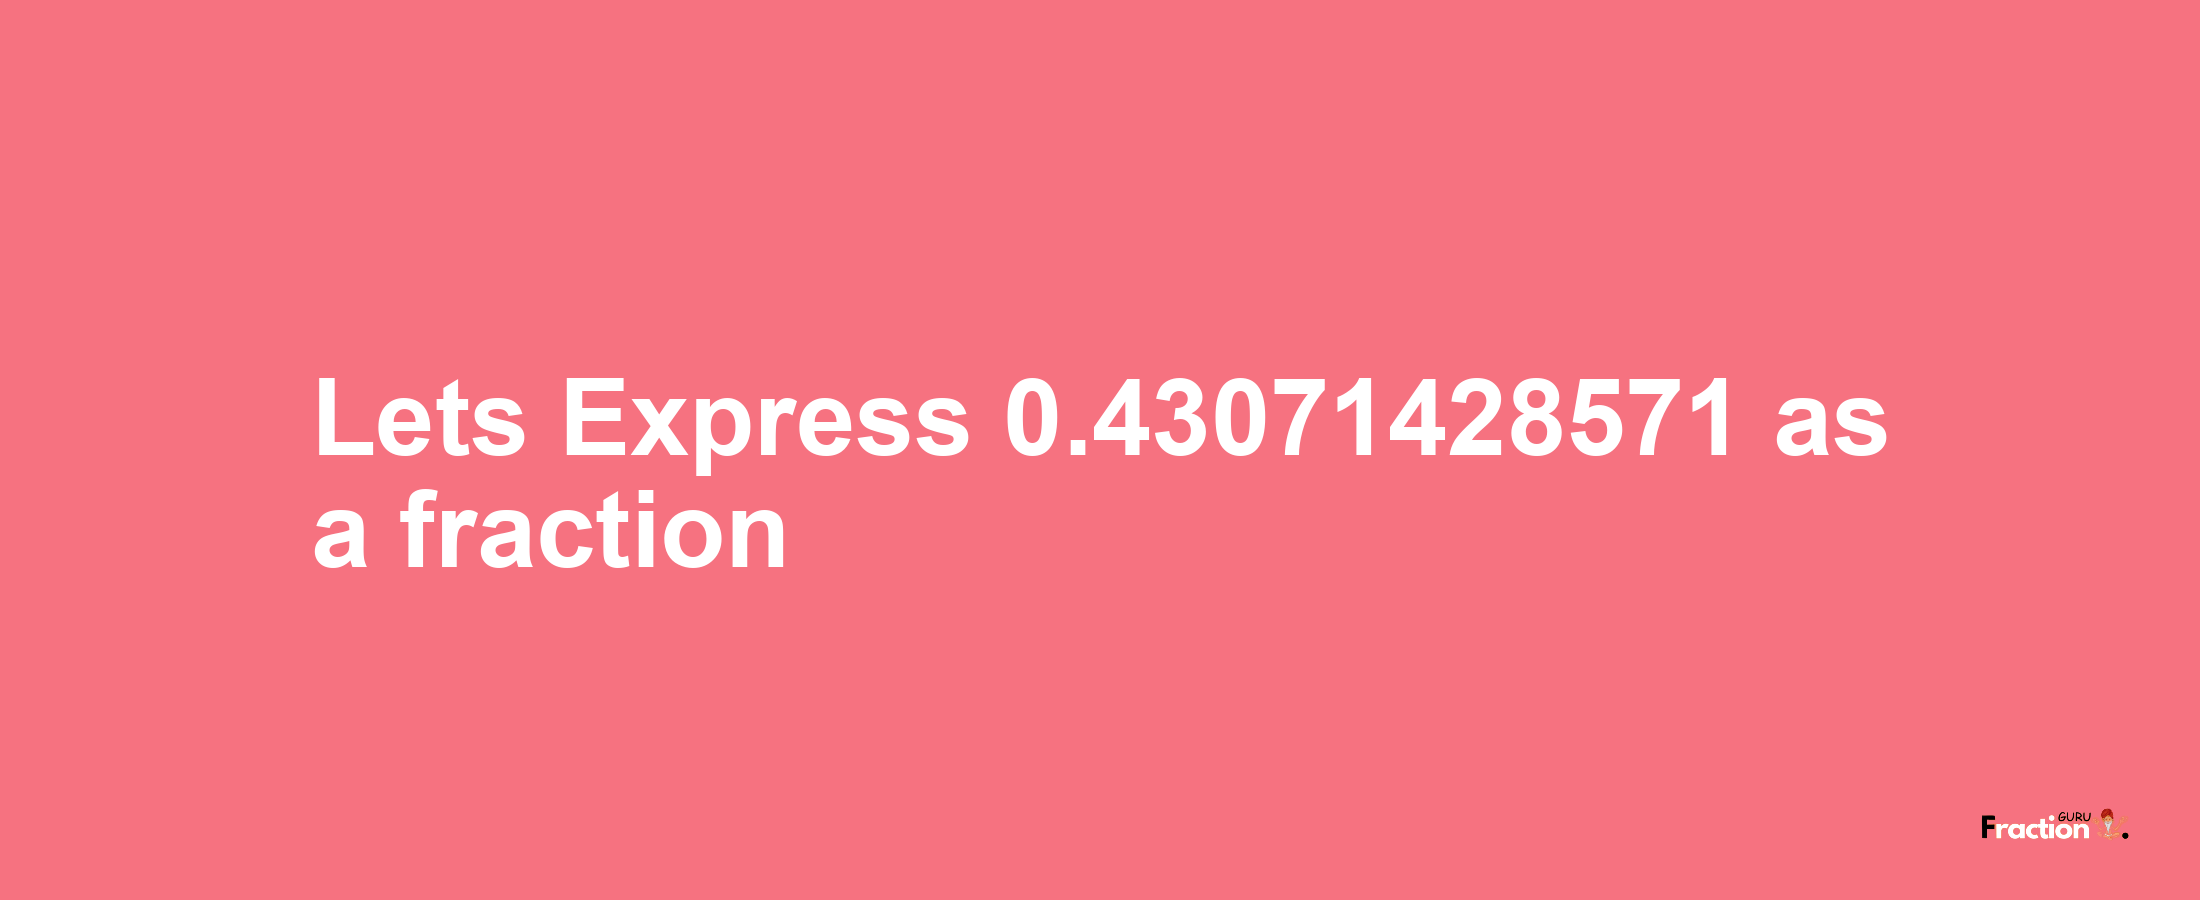 Lets Express 0.43071428571 as afraction